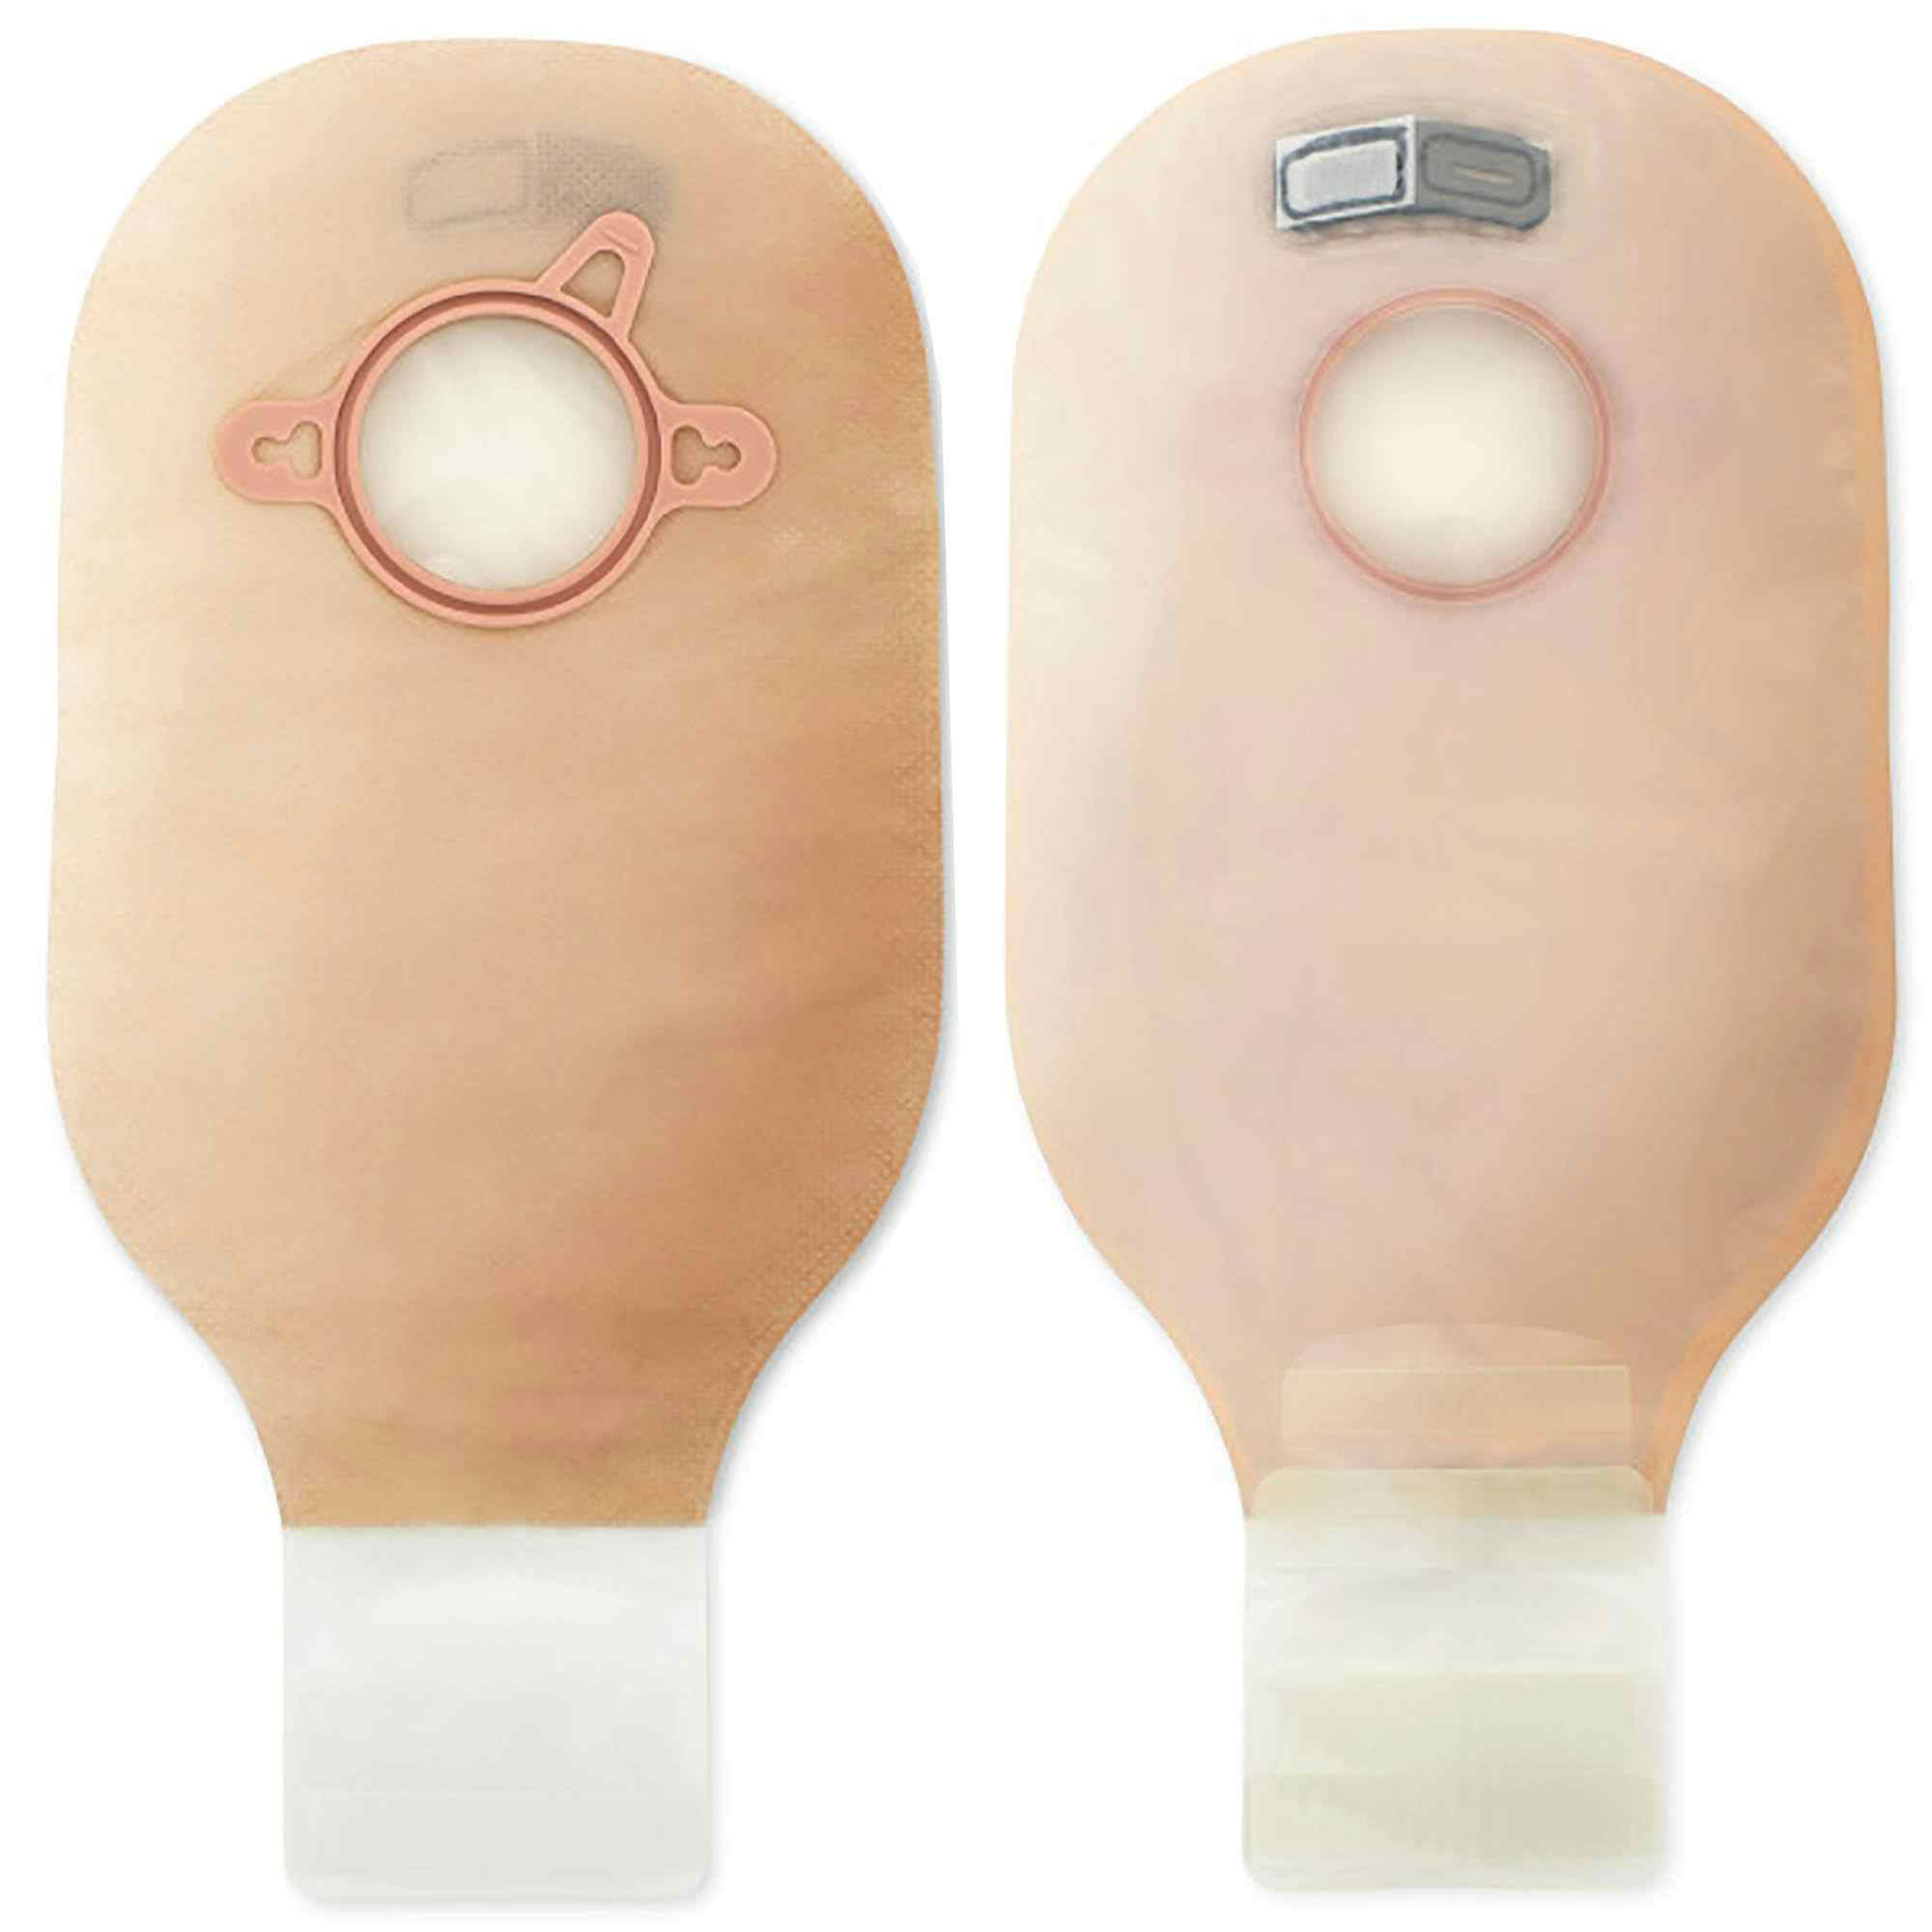 New Image Colostomy Pouch, 12" Length, Drainable, 18183, Beige - Box of 10